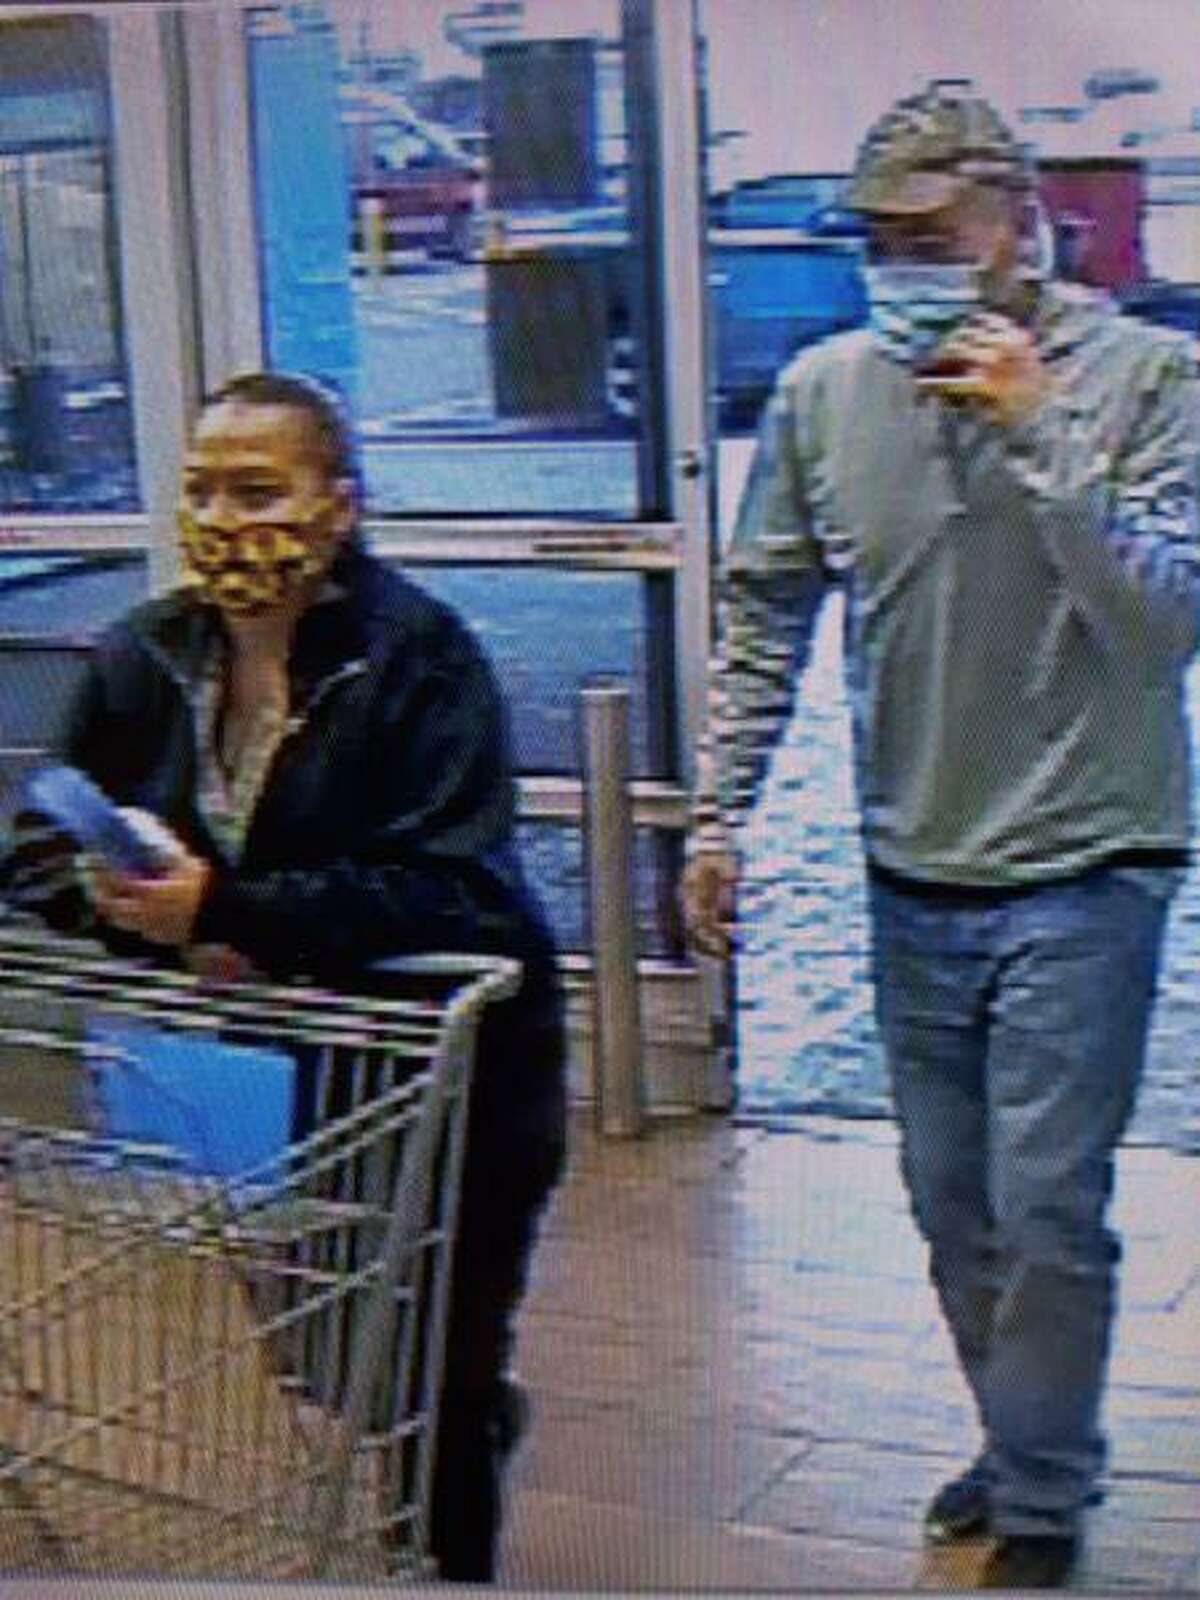 Laredo police said they need to identify these two people in relation to a theft of a television from a local store.